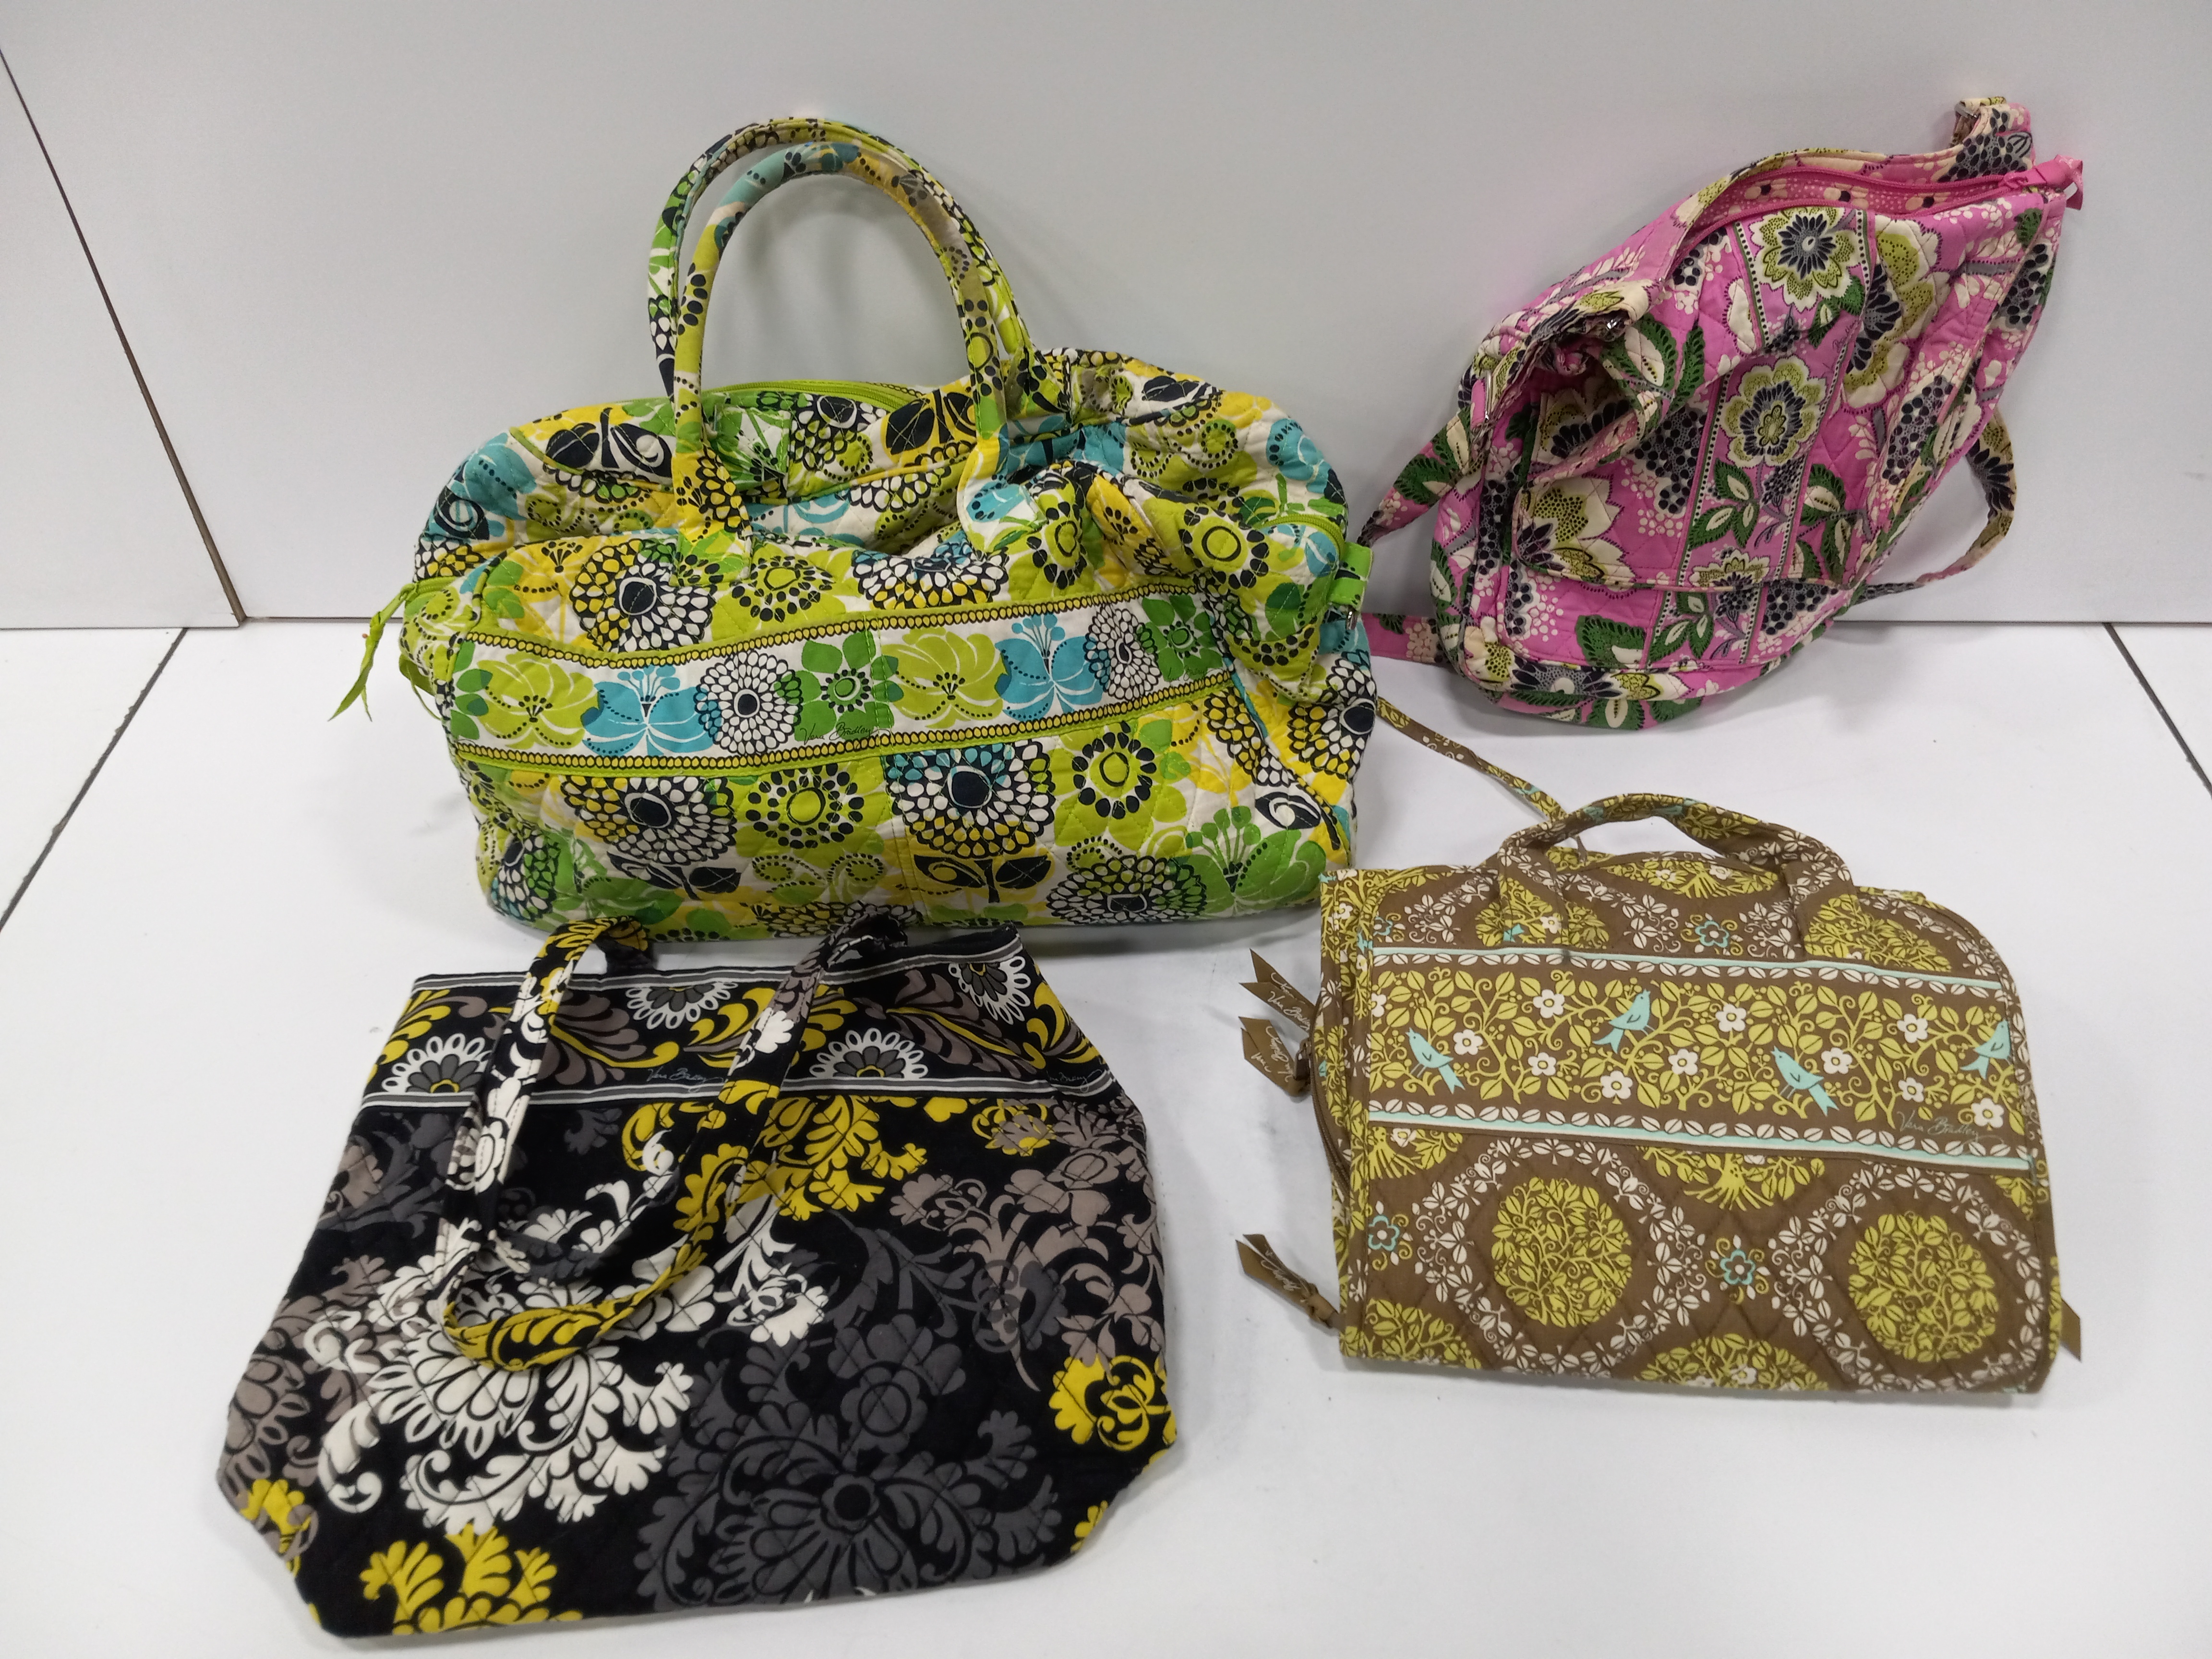 New to Clearance – Vera Bradley Outlet Store